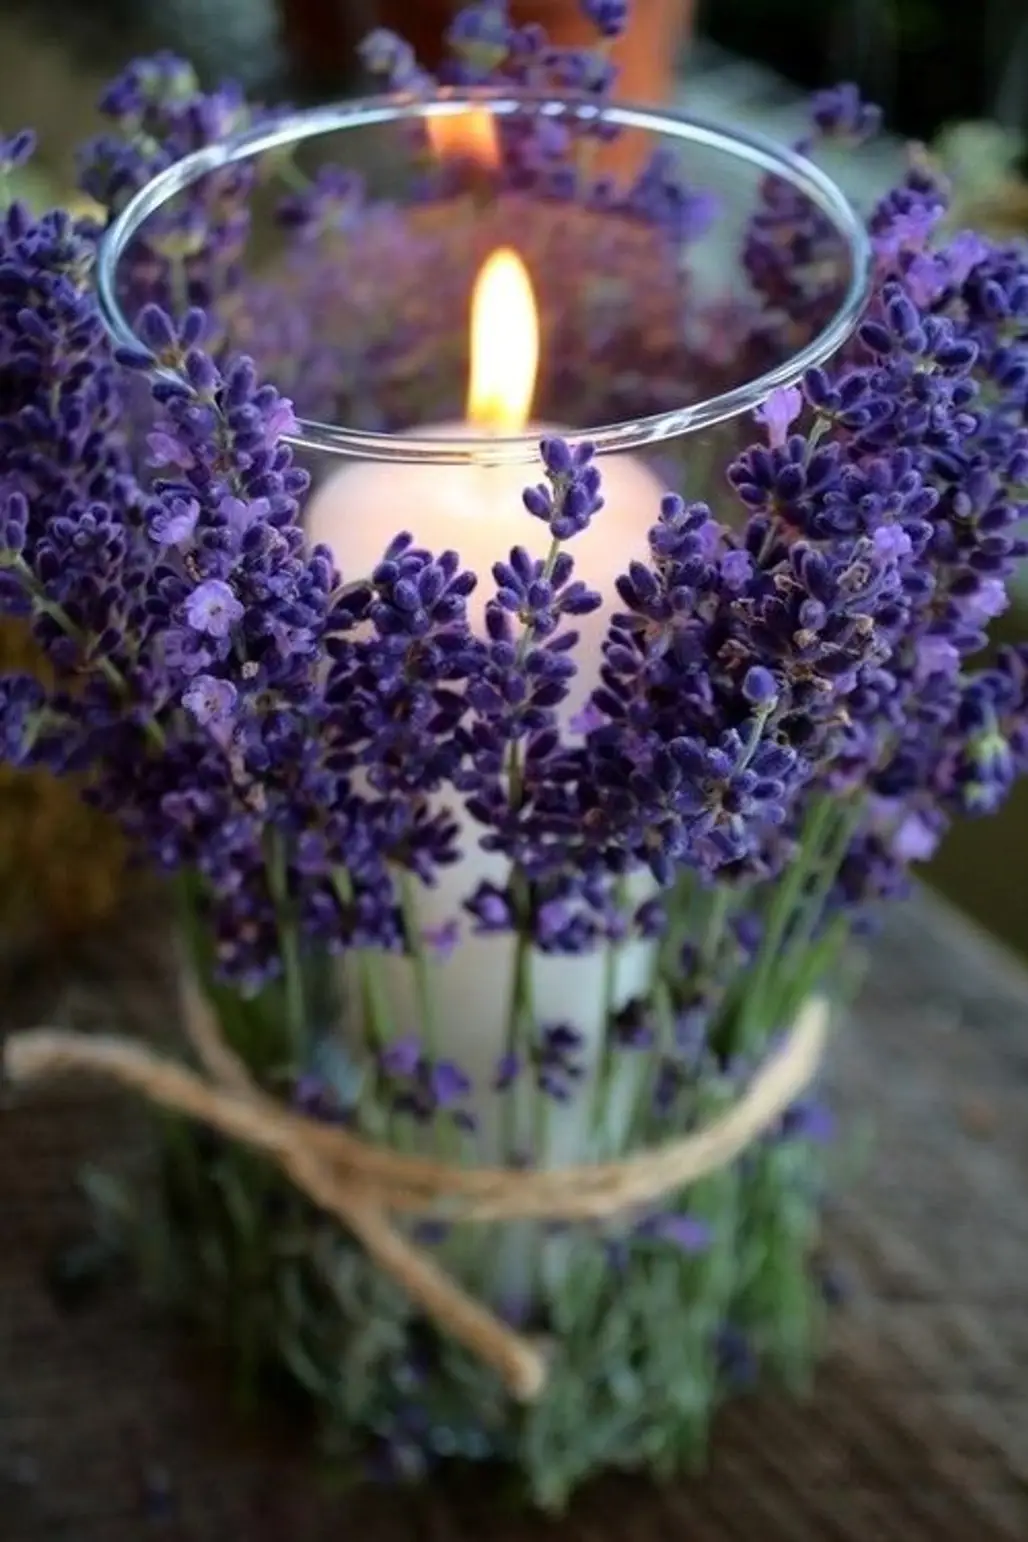 Permeate Your Space with Gorgeous Lavender Aroma